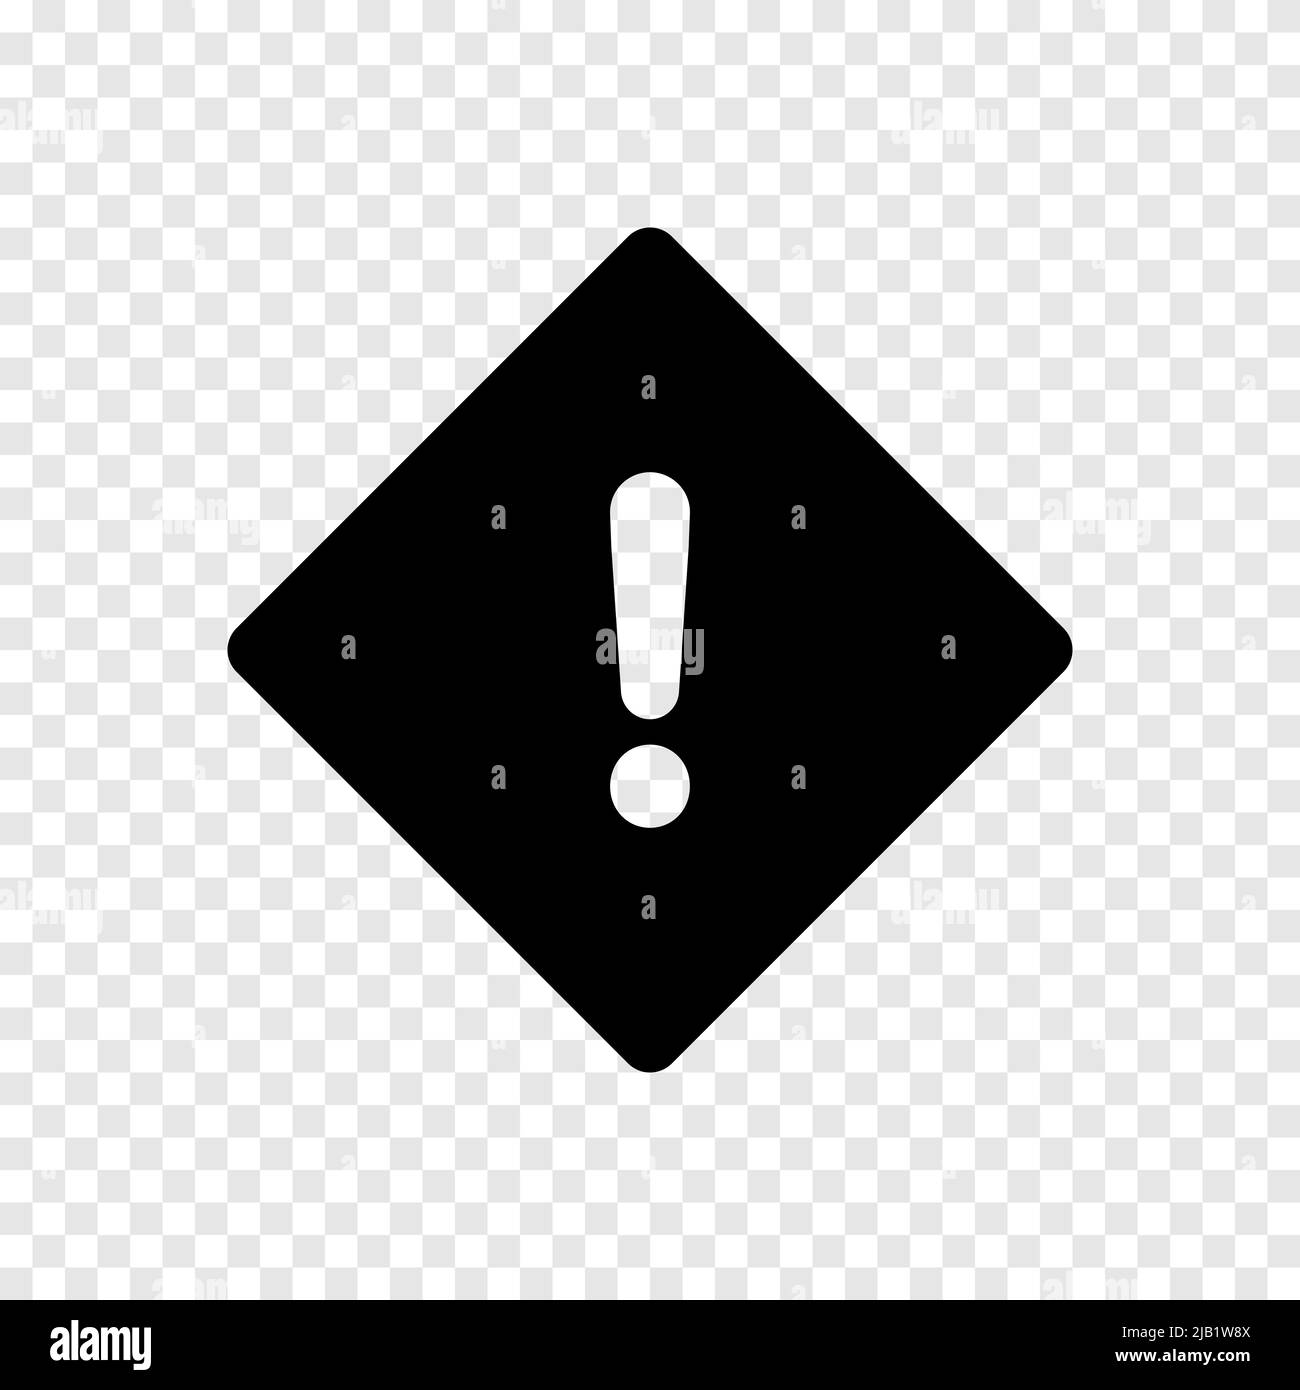 Warning road sign icon on transparent background Stock Vector